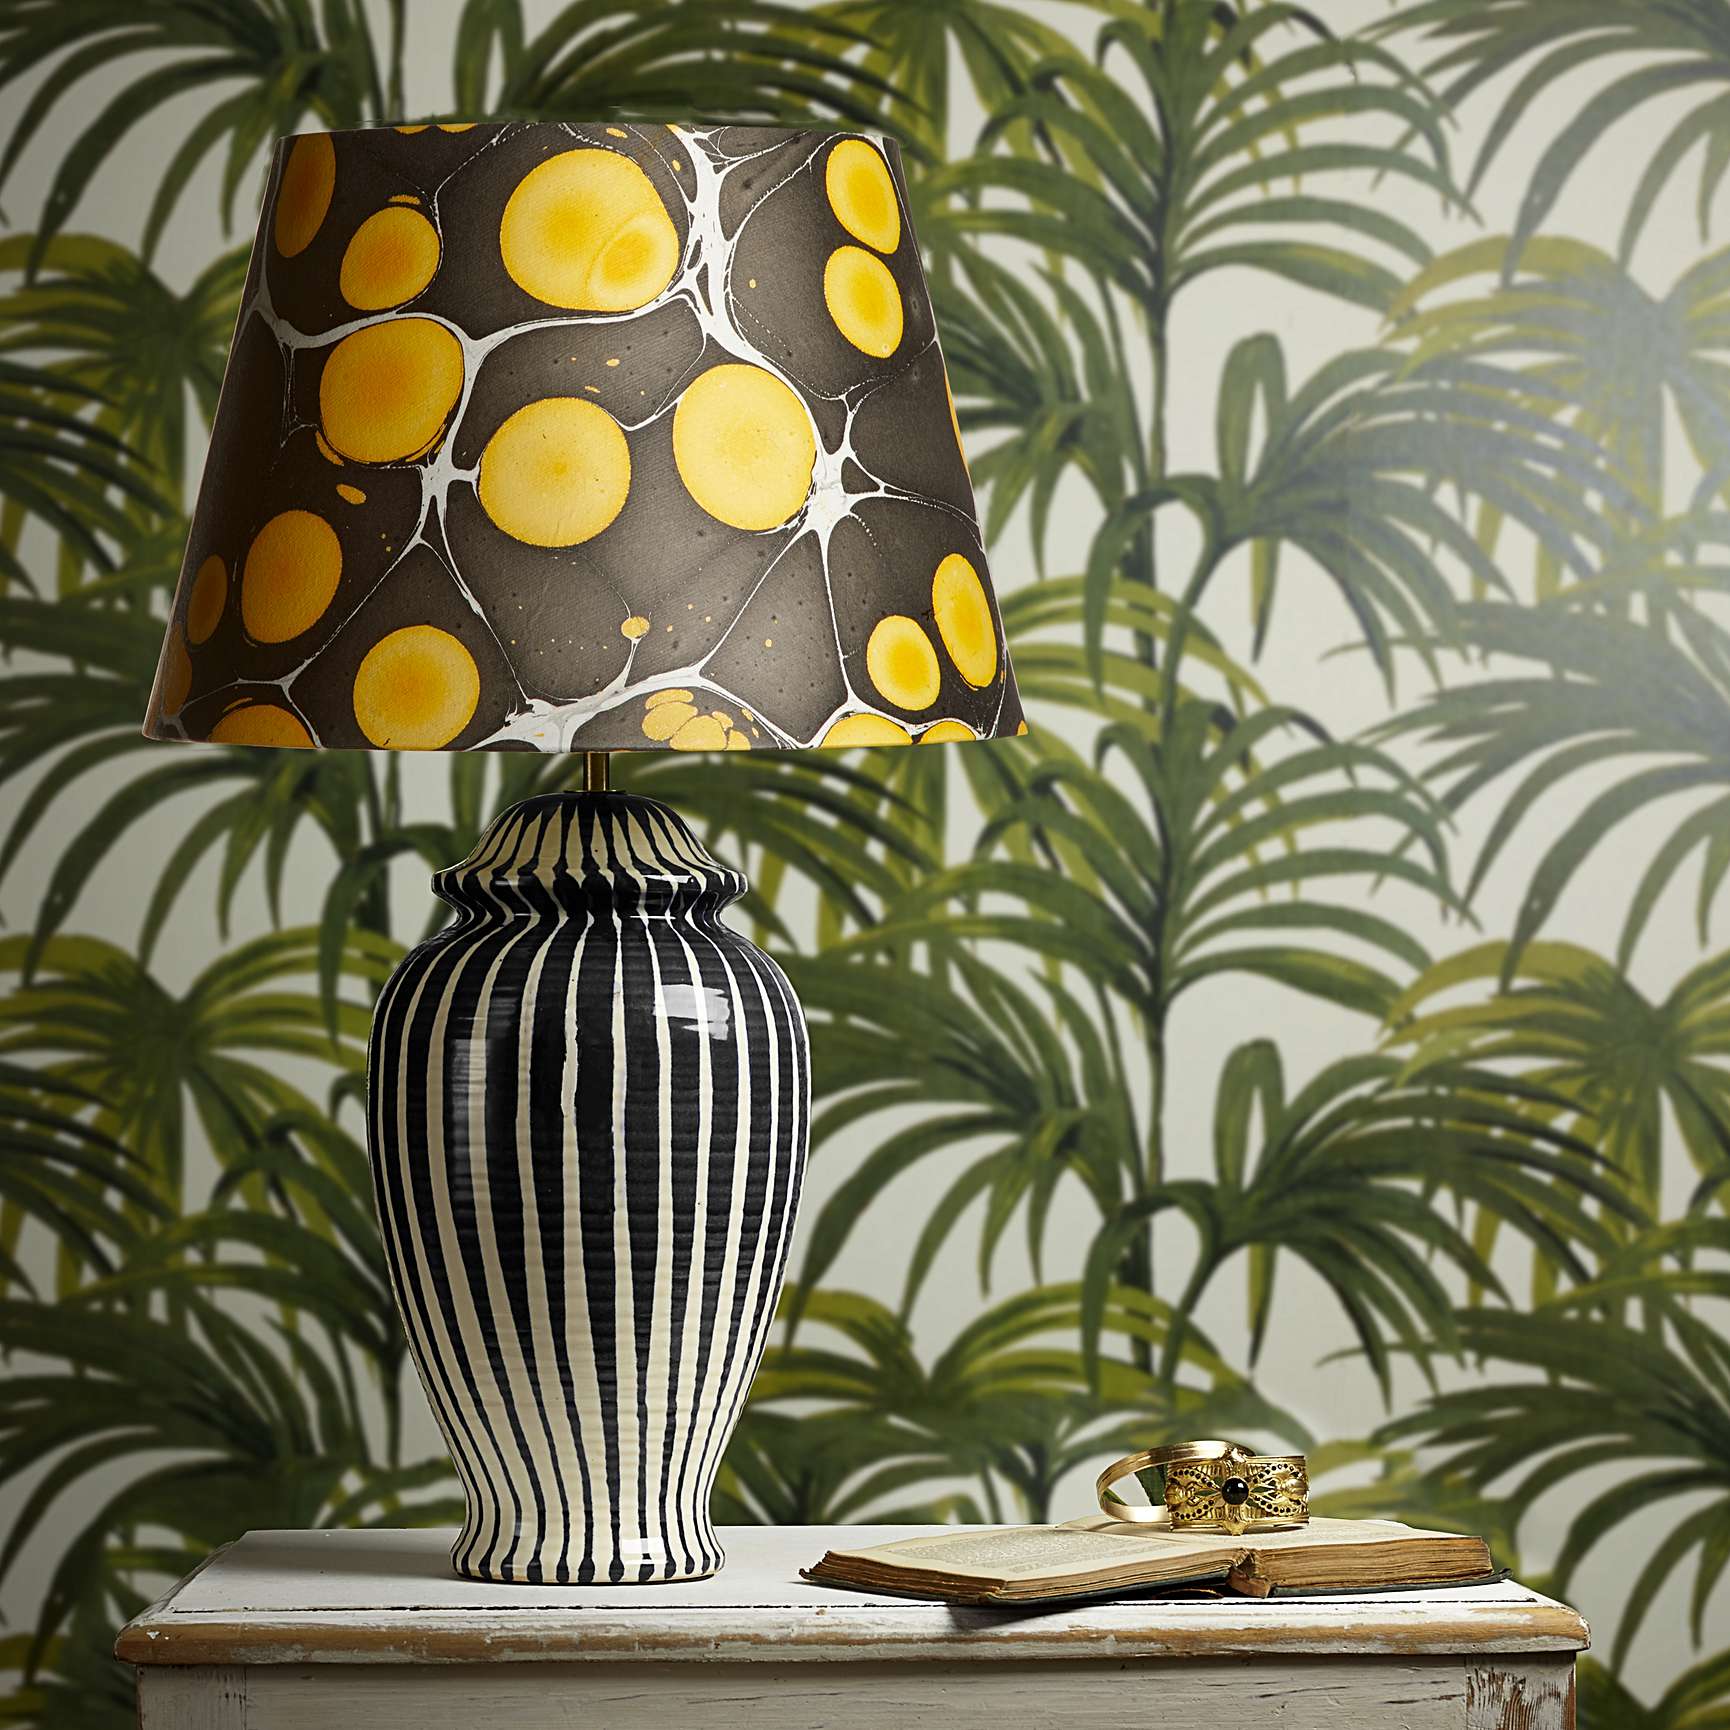 black and white stripy lamp base with a black and gold marbleized paper shade against a palm print backdrop